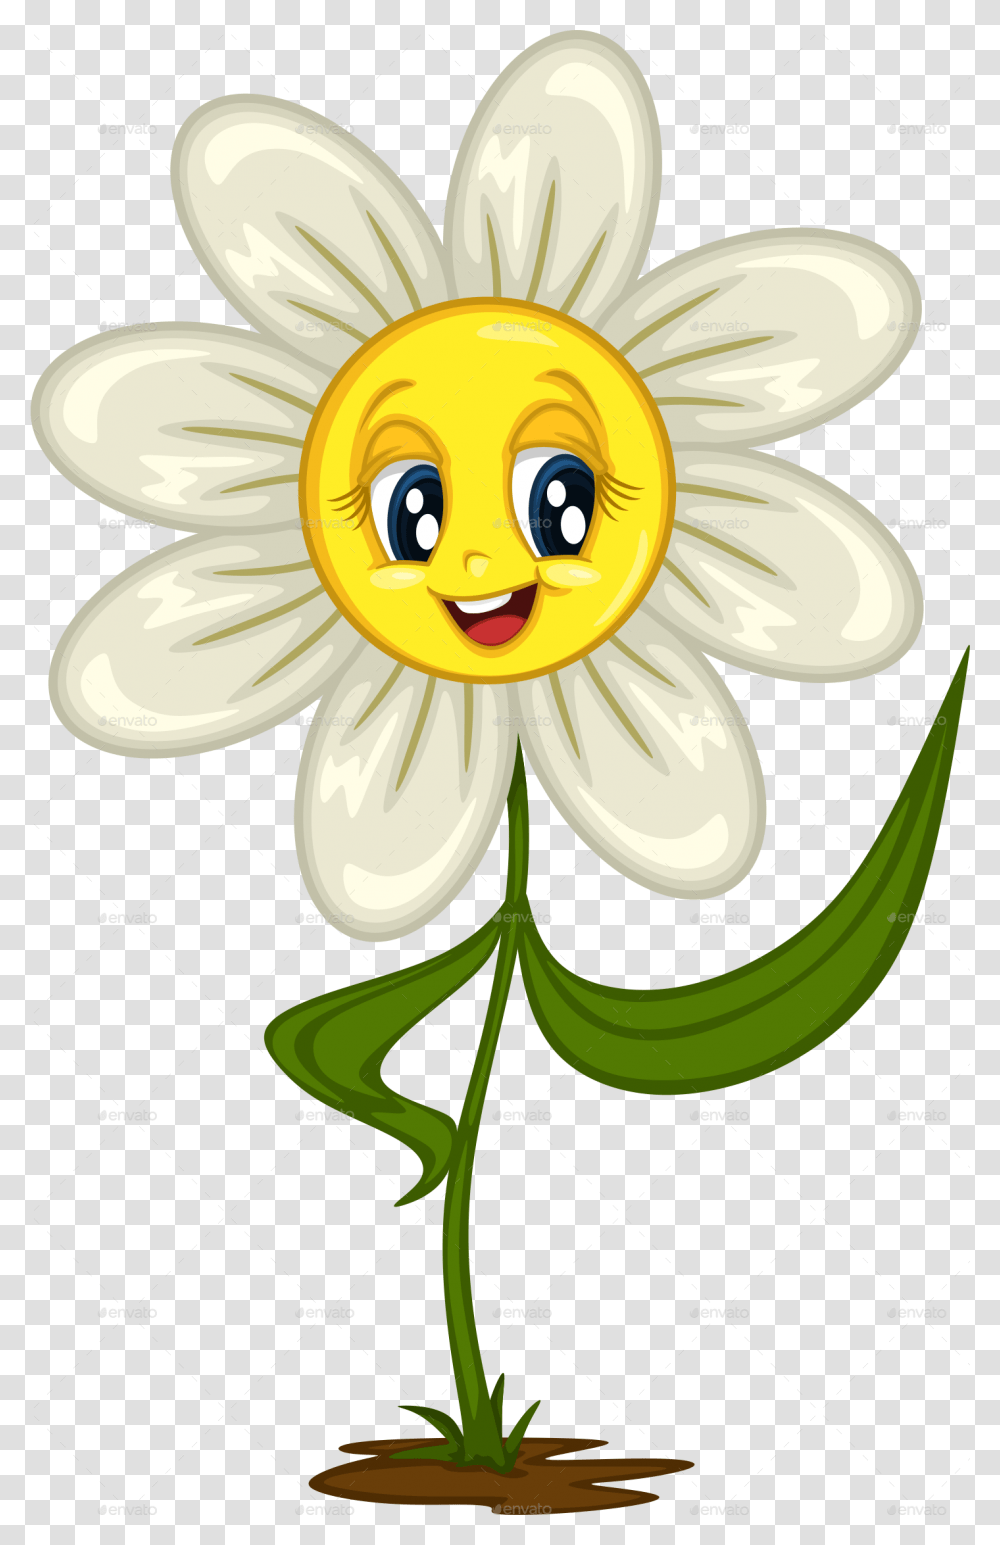 Cartoon Flower For Free Download On Ya Webdesign, Plant, Daisy, Anther, Petal Transparent Png